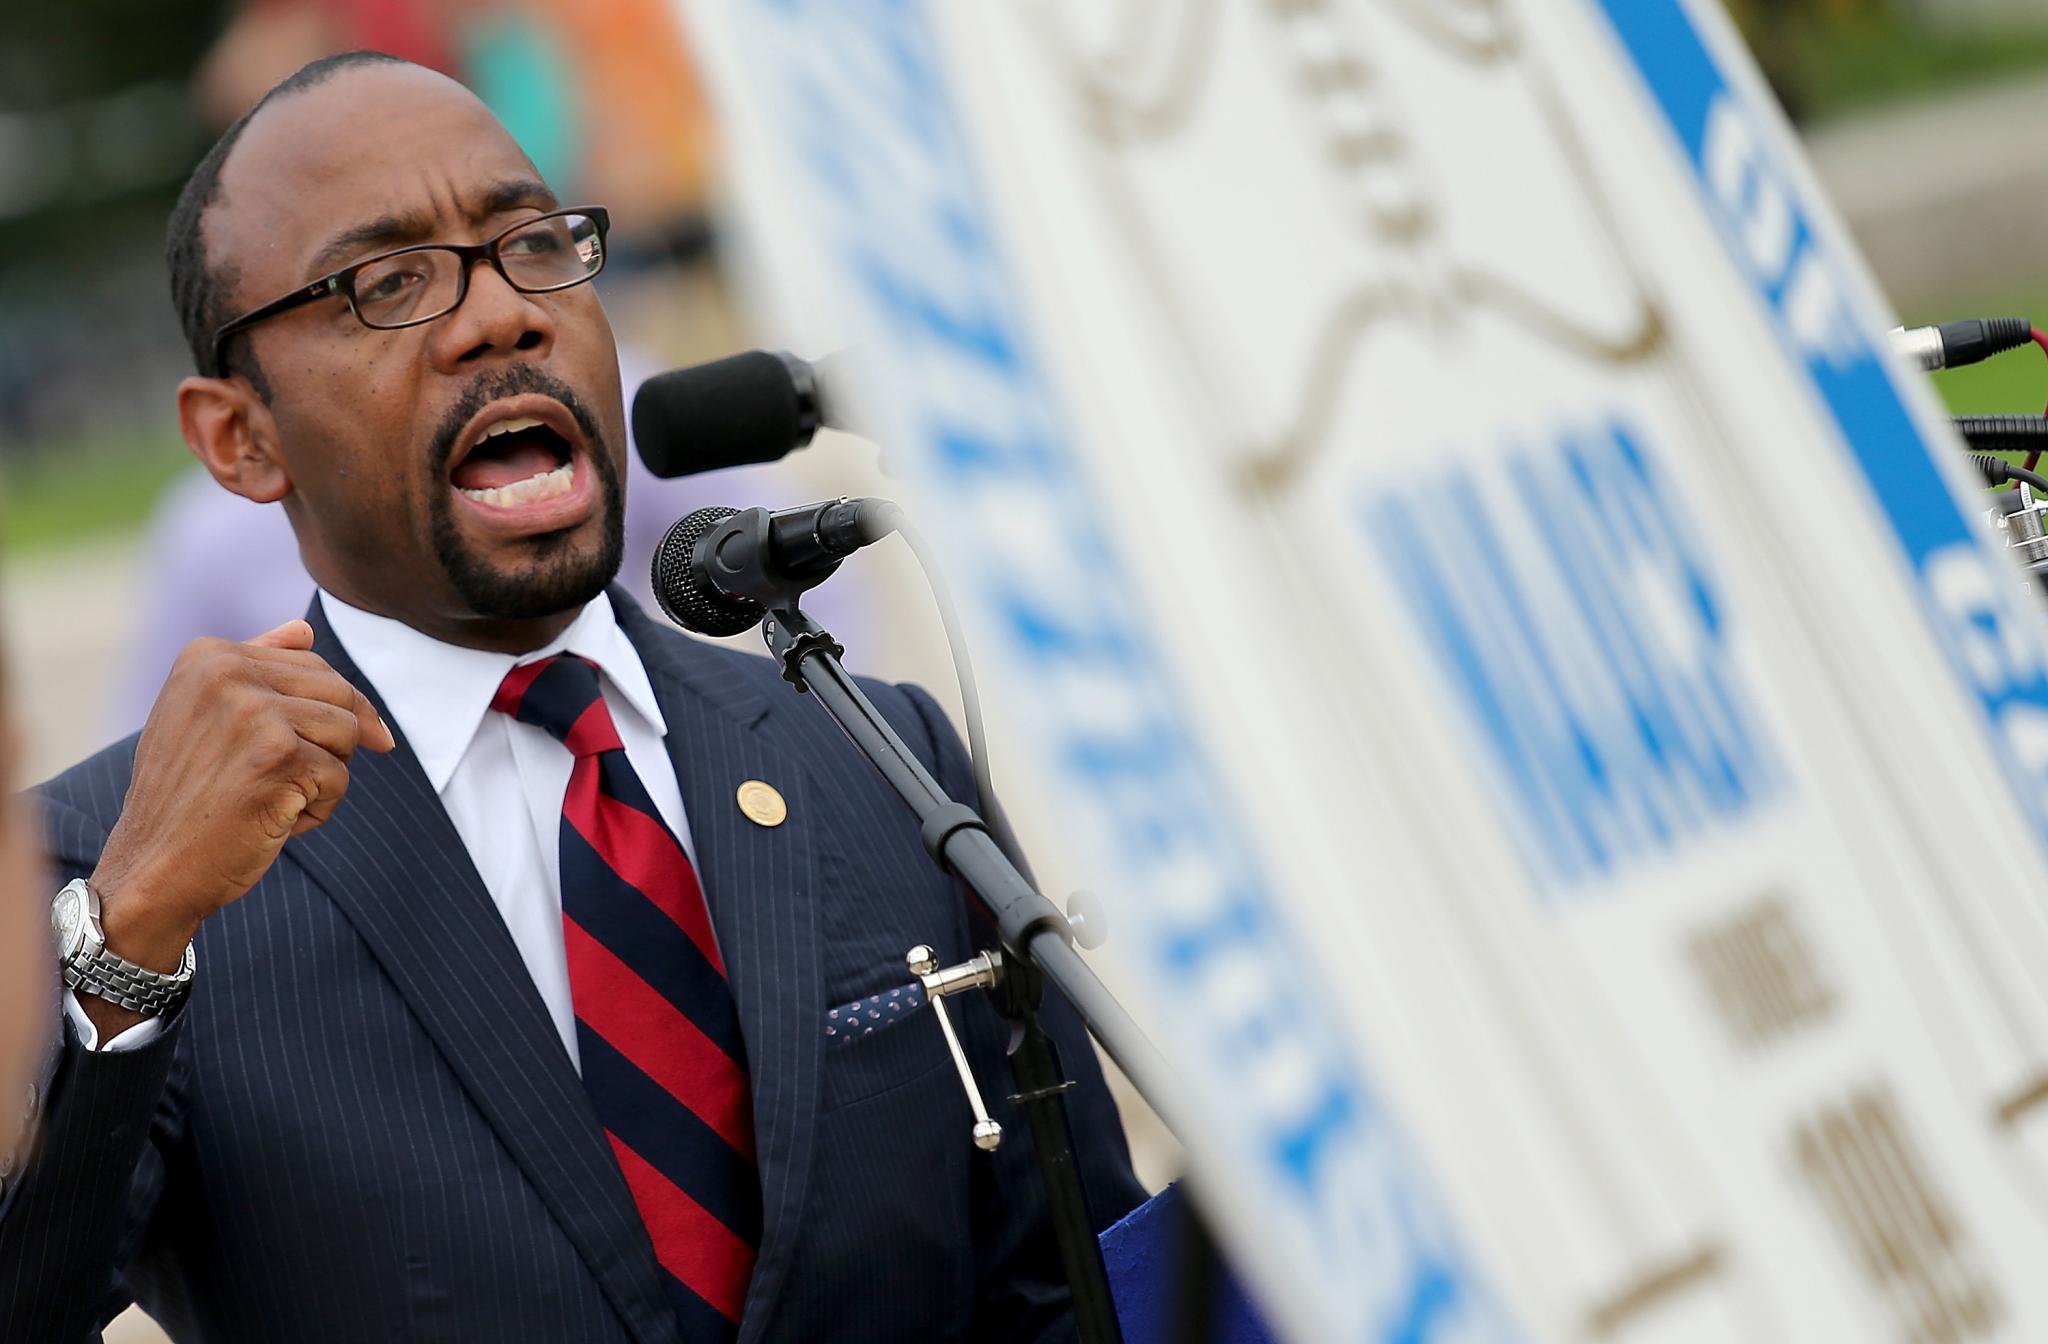 NAACP Embarks on 800-Mile ‘Journey to Justice’ March, from Selma to D.C.